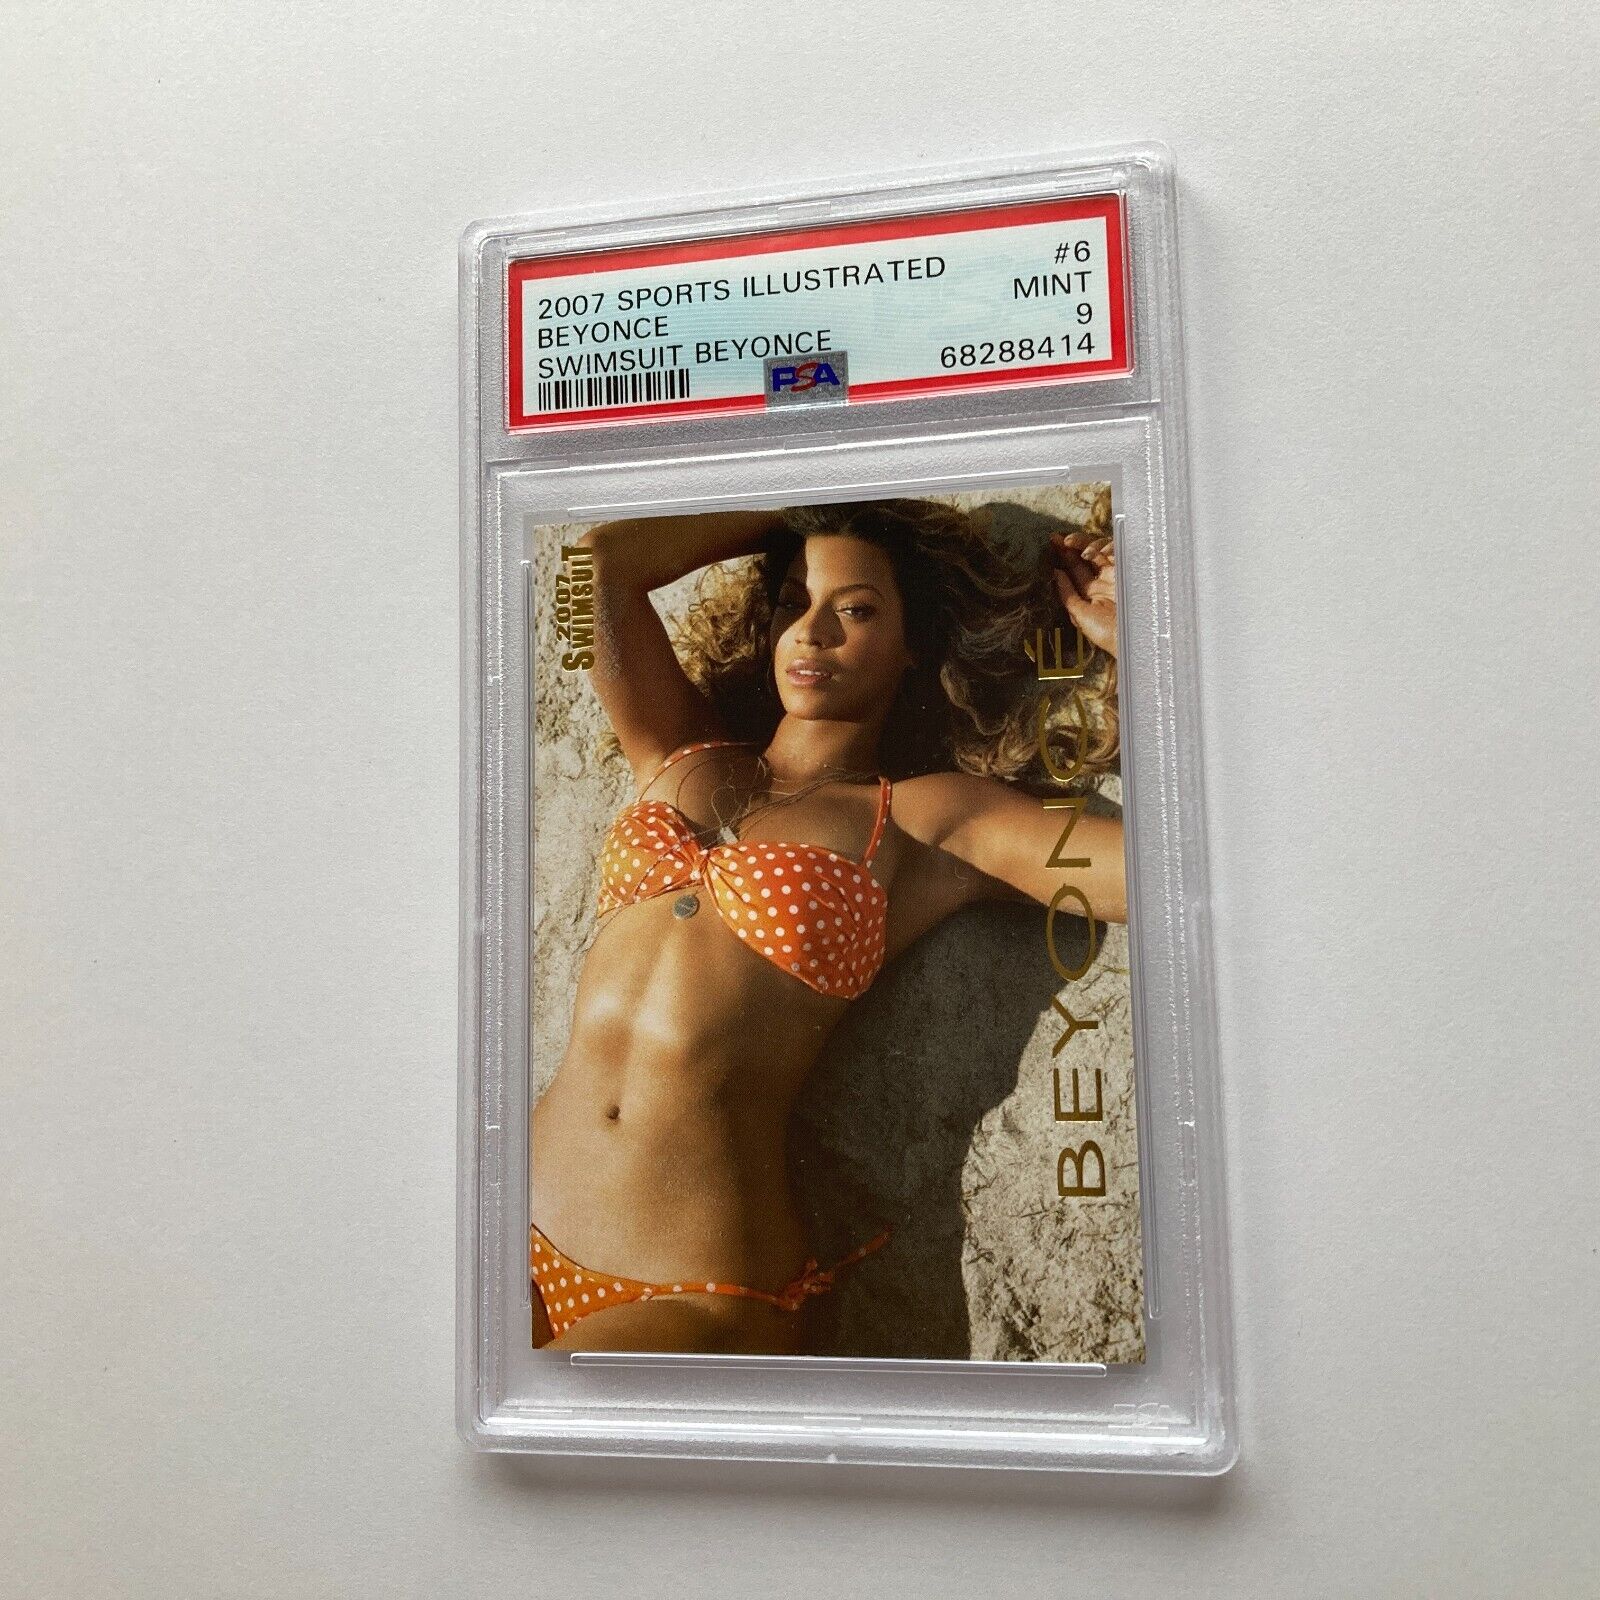 Beyonce 2007 Sports Illustrated Swimsuit Rookie Card #6 POP of Only 8 PSA 9 MINT